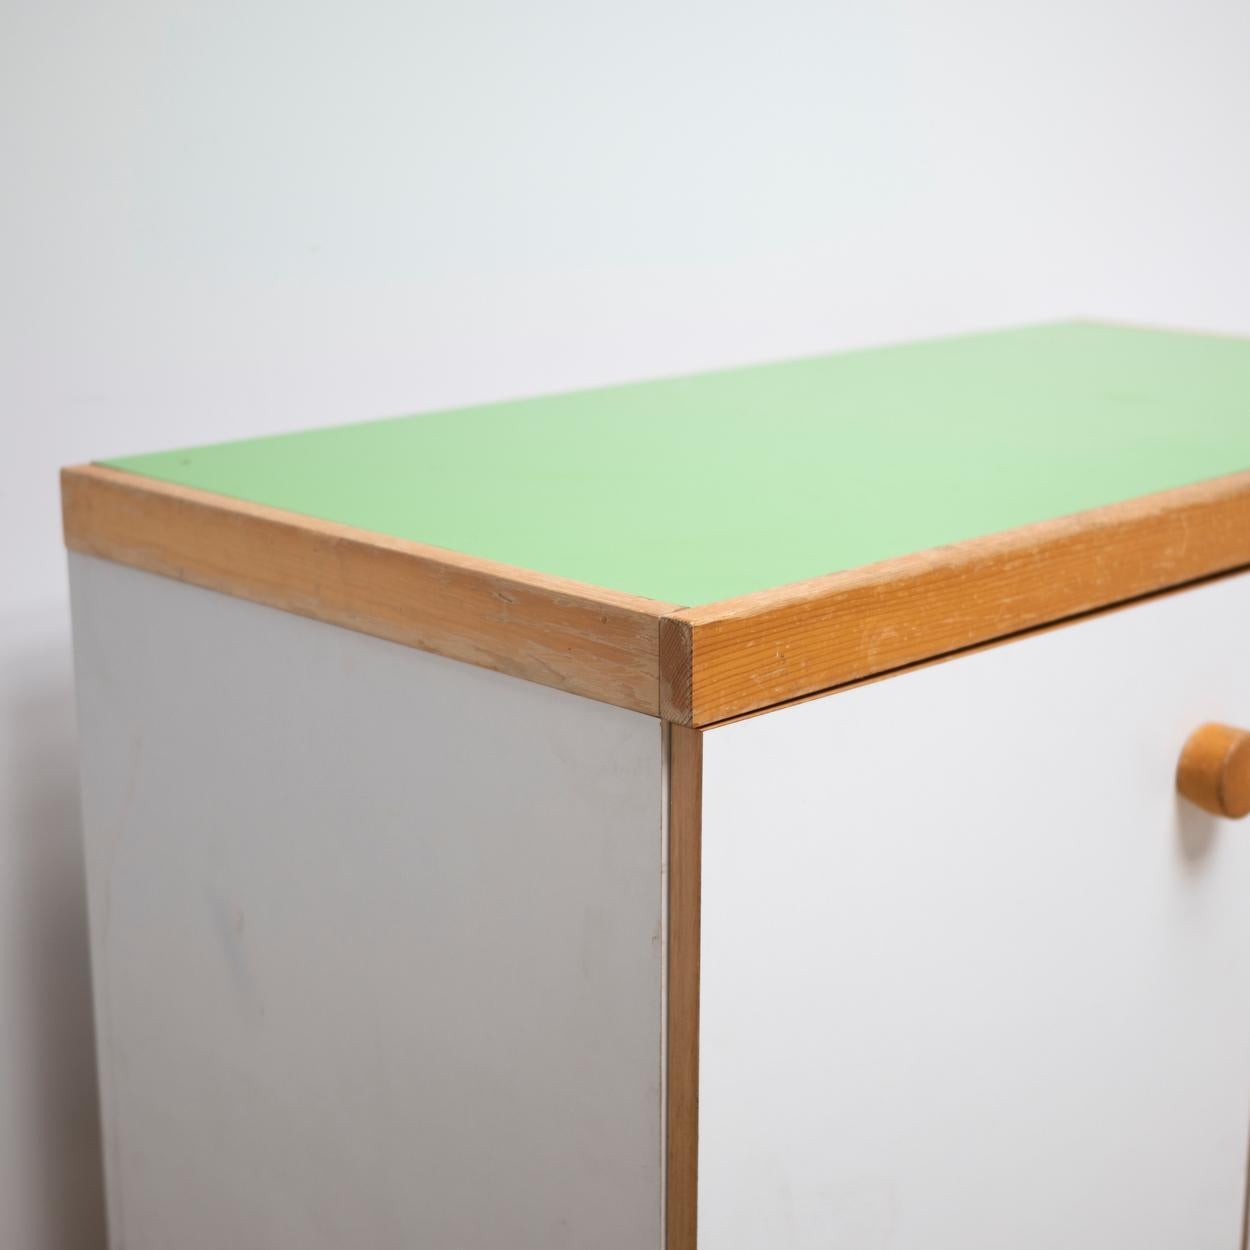 Charlotte Perriand Side Board from Les Arcs, 2 Doors, Green Top In Good Condition For Sale In Edogawa-ku Tokyo, JP